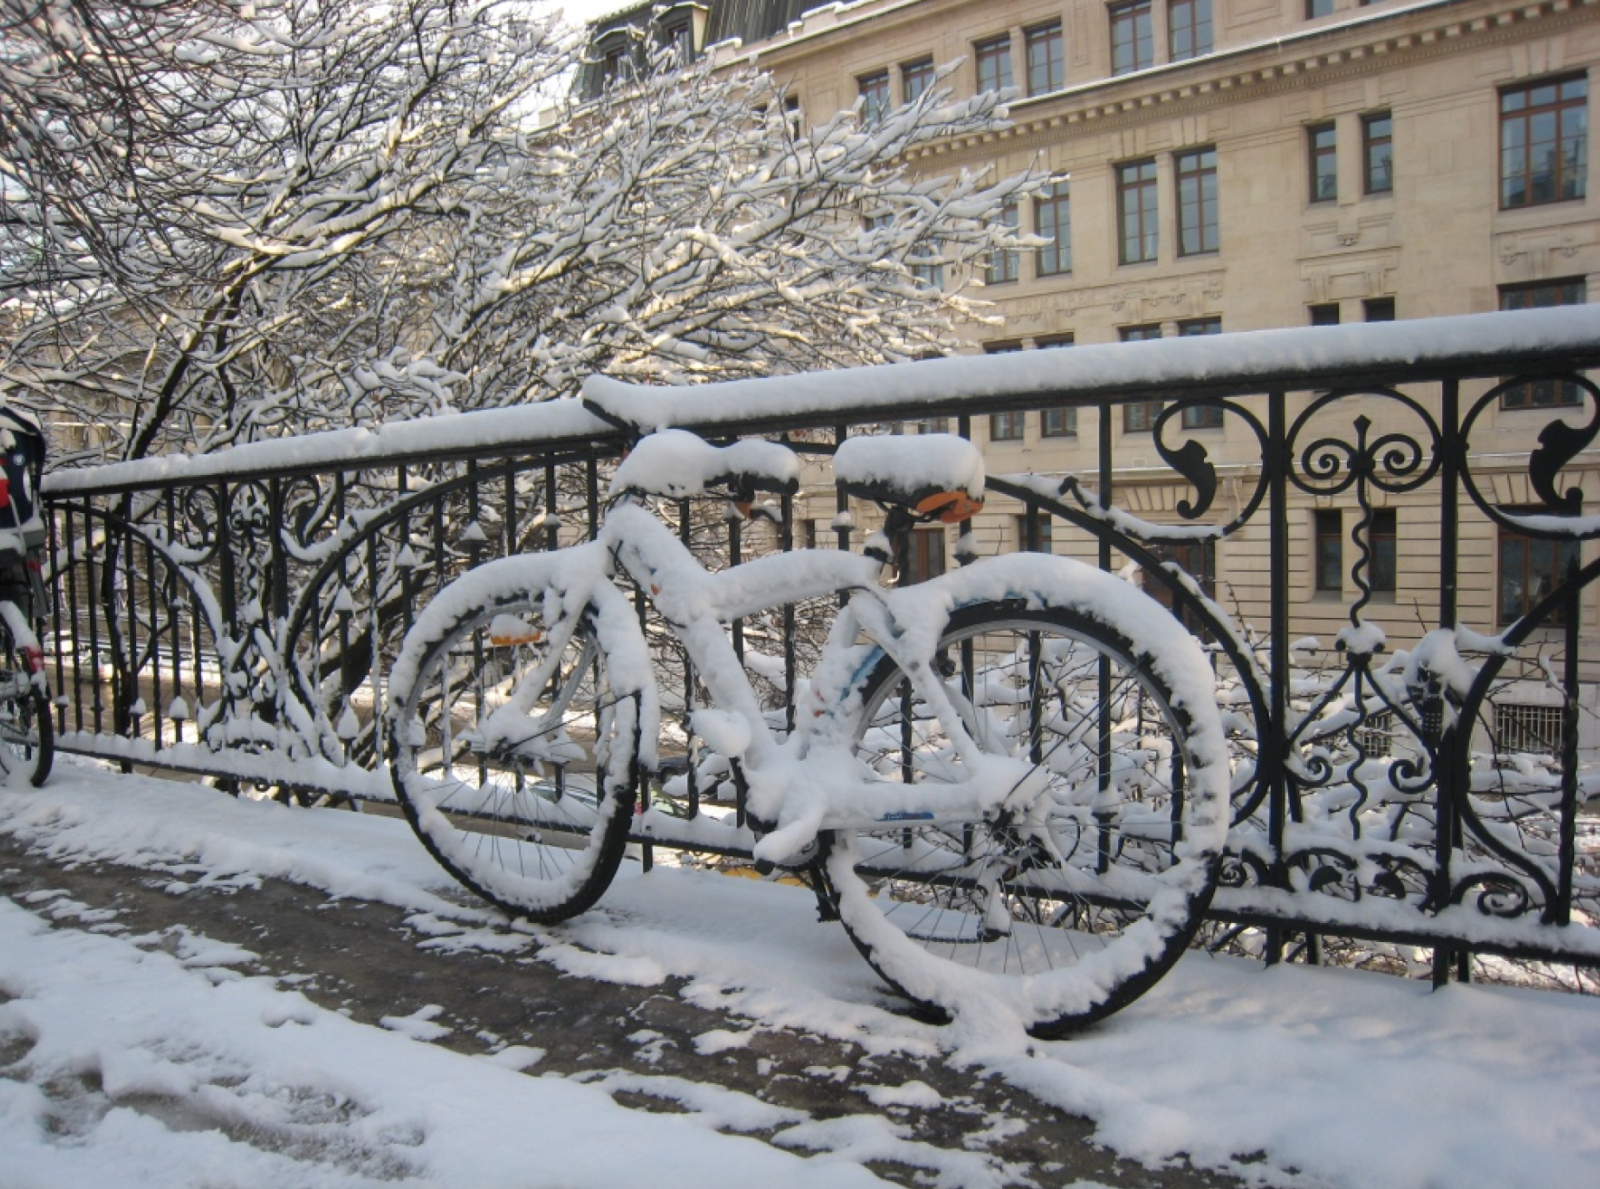 bicycle-covered-in-snow-leaning-on-a-fence-in-winter